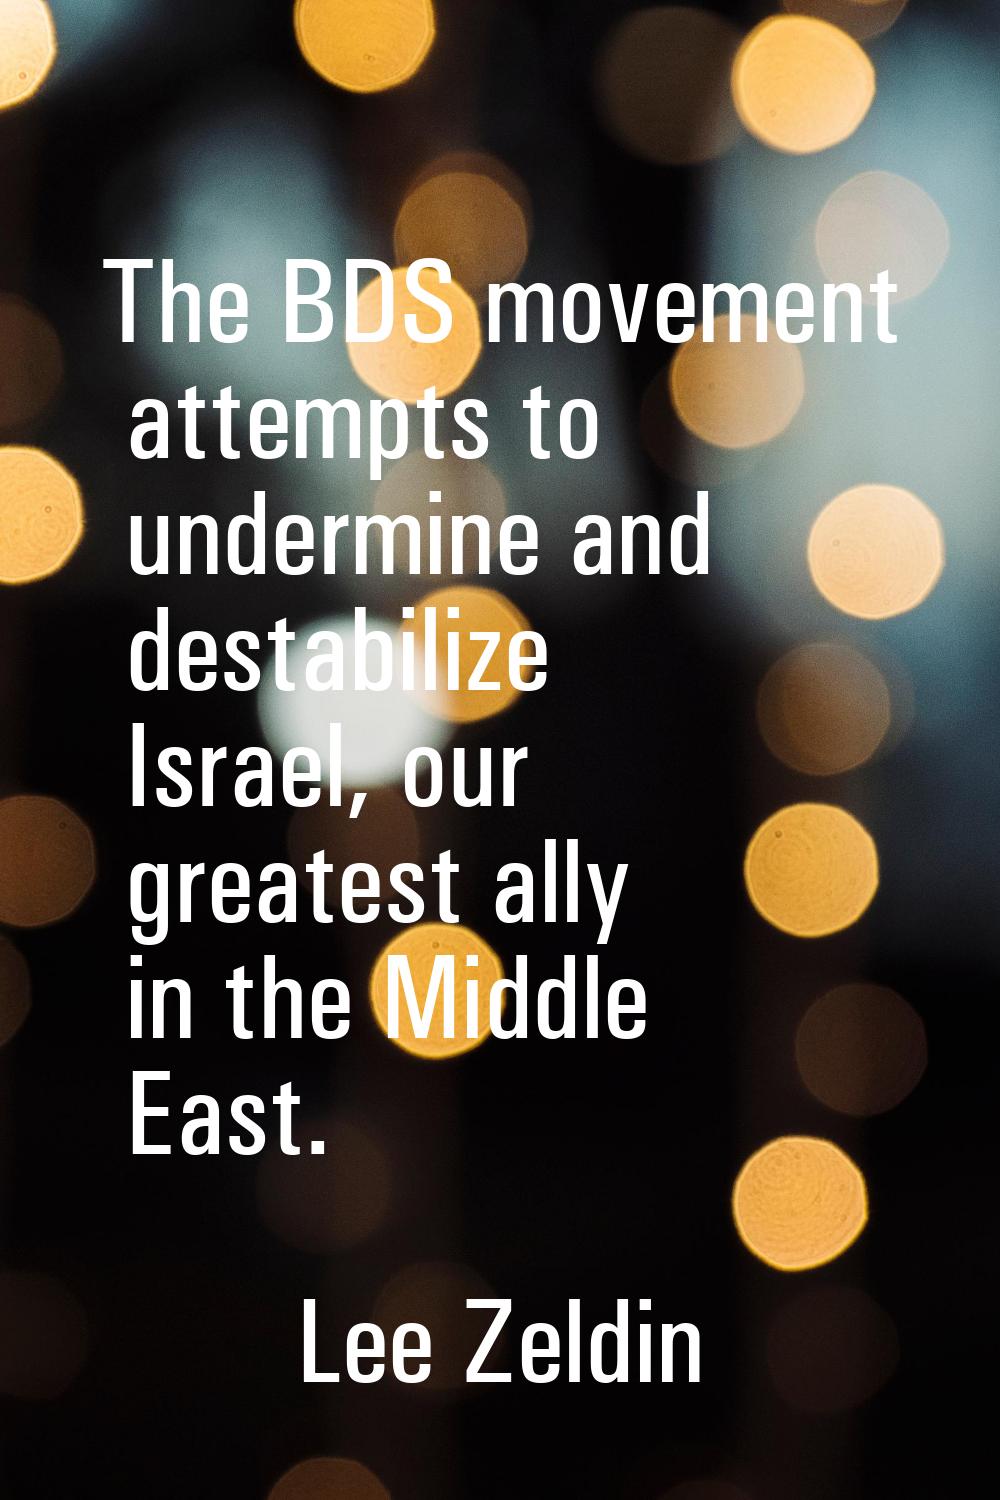 The BDS movement attempts to undermine and destabilize Israel, our greatest ally in the Middle East